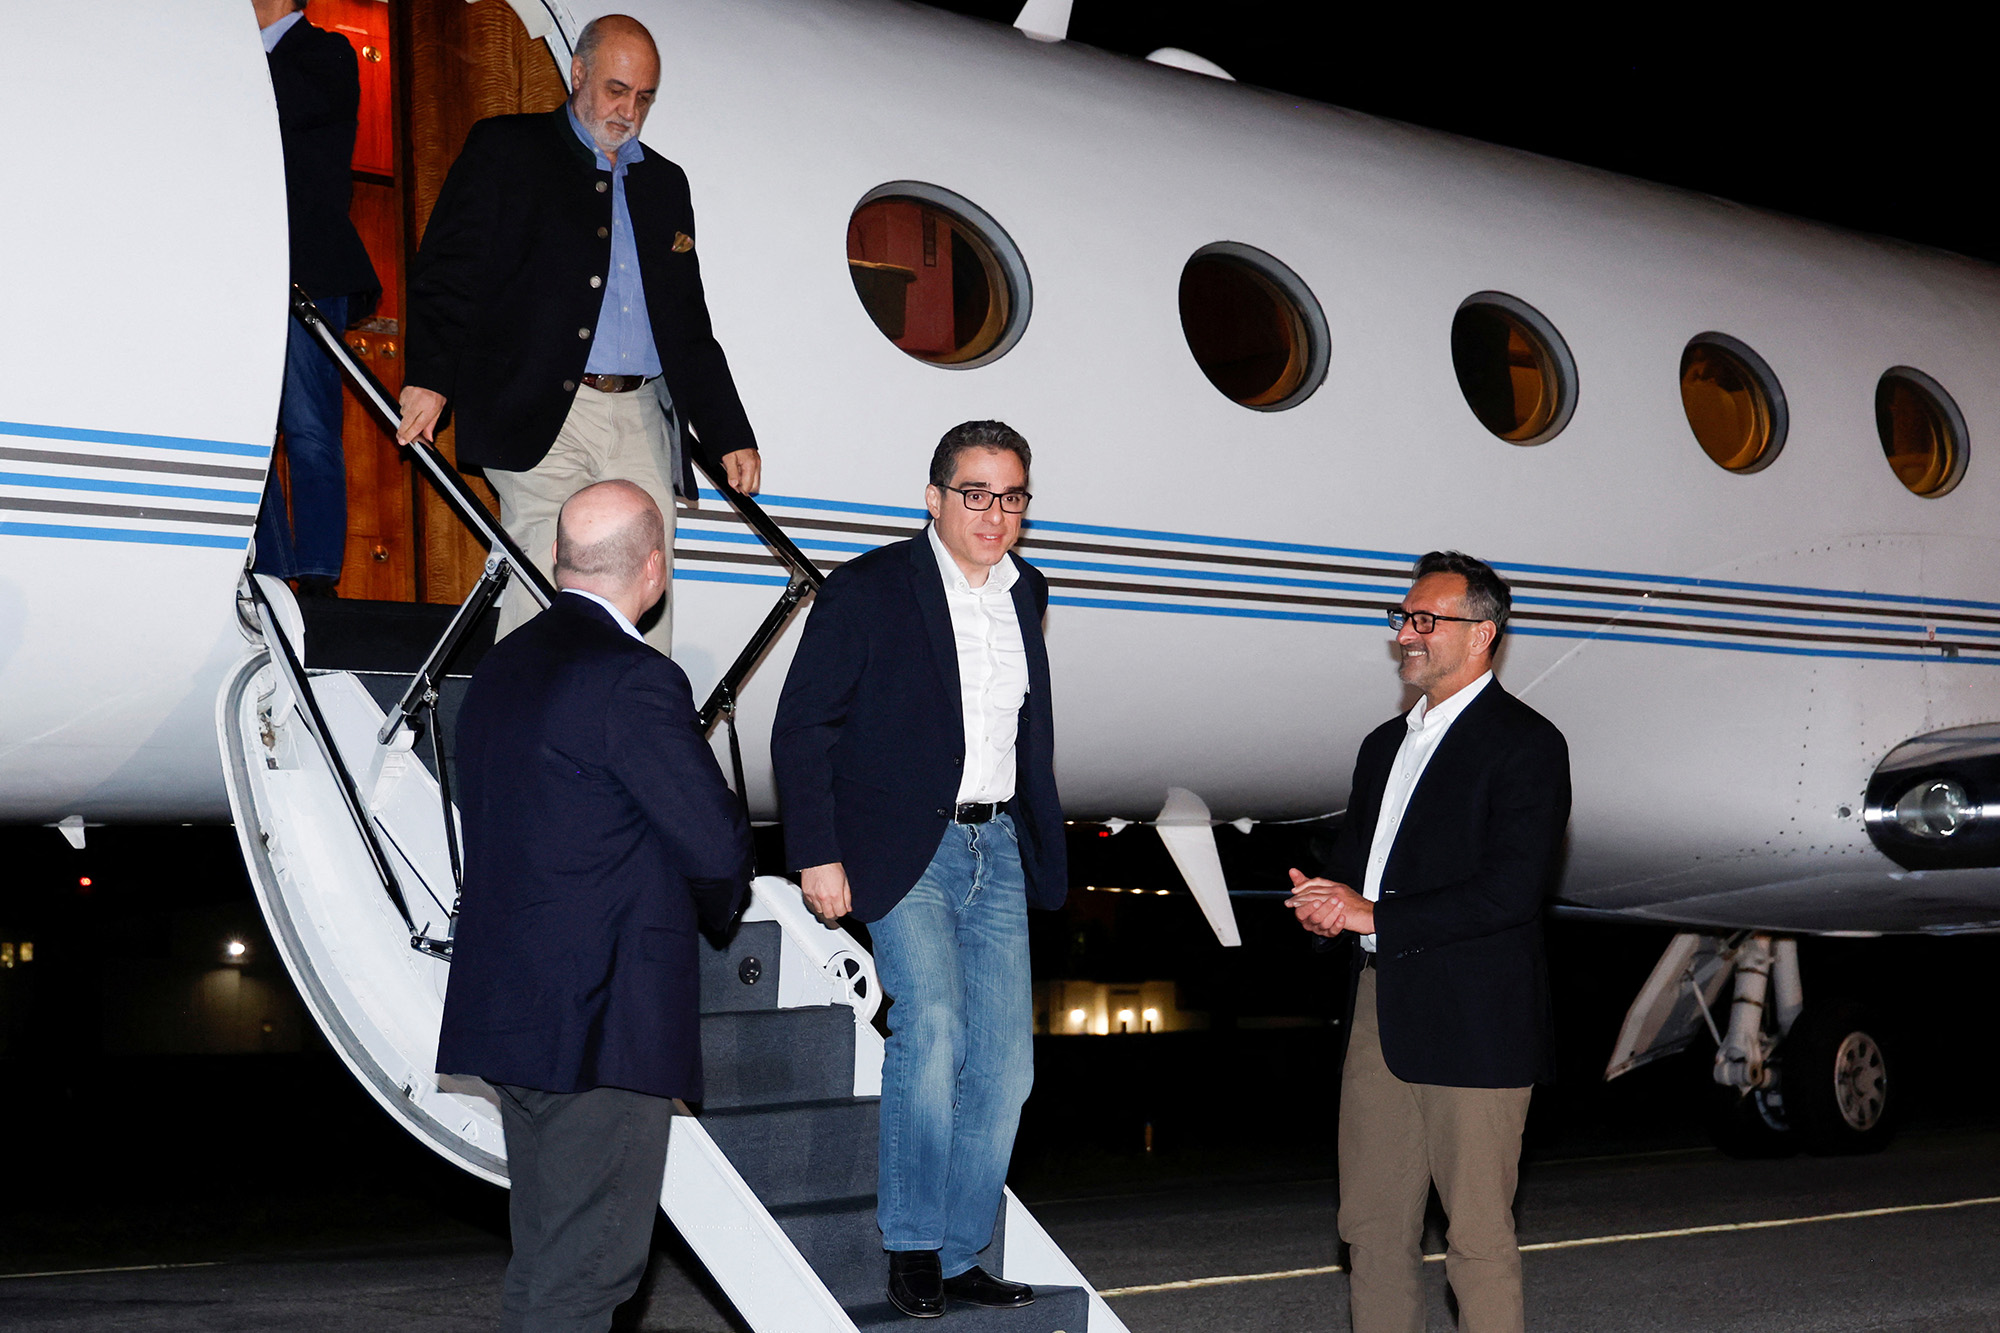 U.S. Special Presidential Envoy for Hostage Affairs Roger Carstens, right, greets freed Americans Siamak Namazi, Morad Tahbaz and Emad Shargi, who were released in a prisoner swap deal between U.S and Iran, as they arrive at Davison Army Airfield at Fort Belvoir, Virginia, U.S., on September 19, 2023.